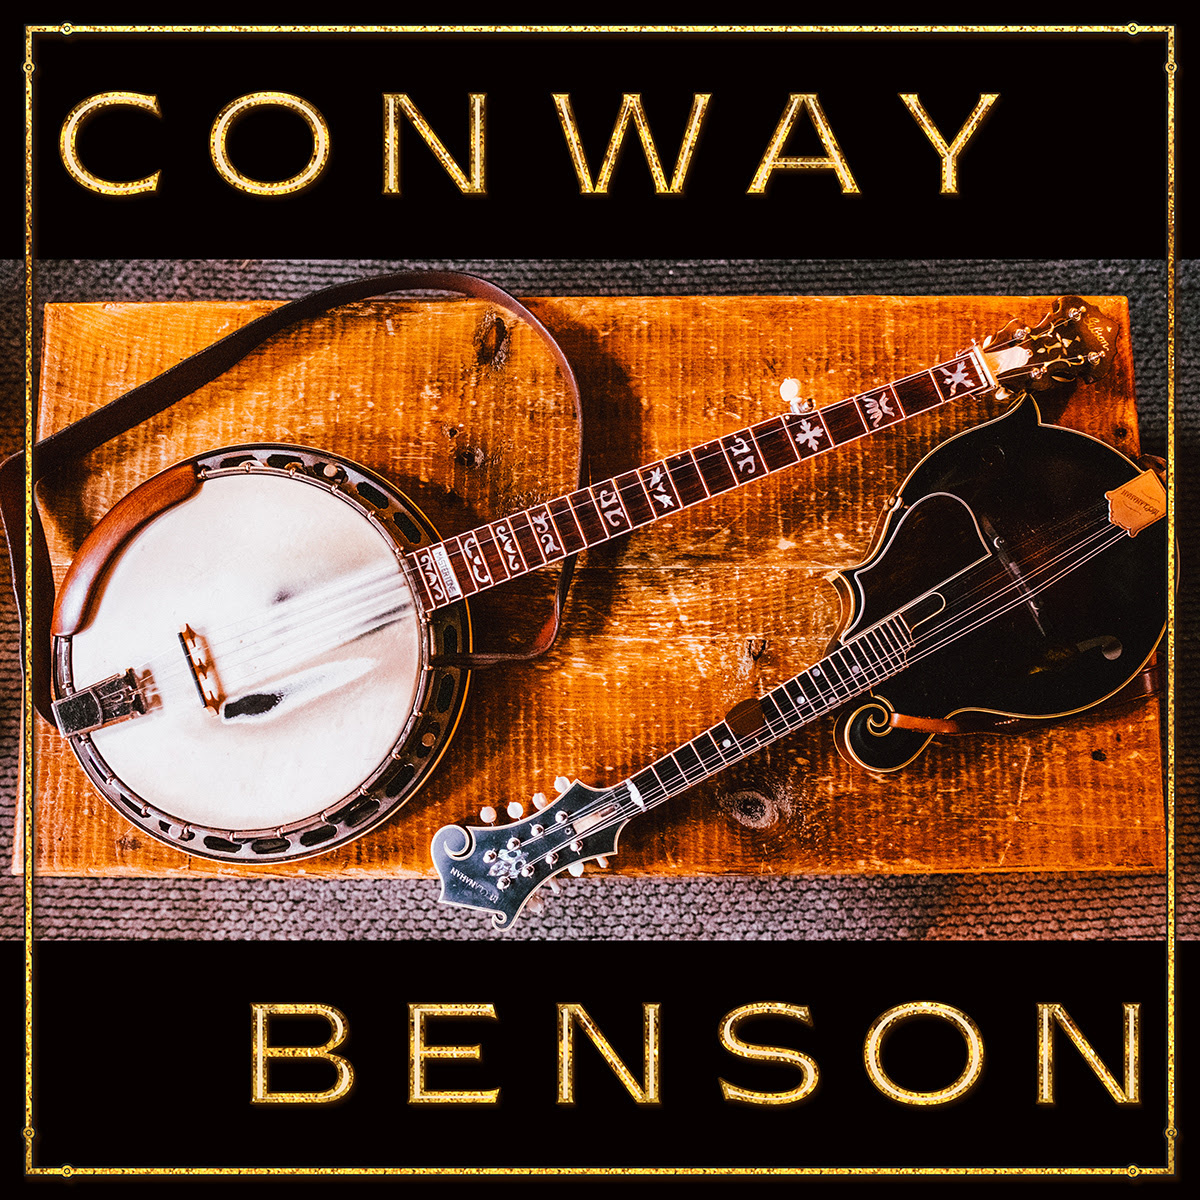  Benson's first single, "Conway," is out now